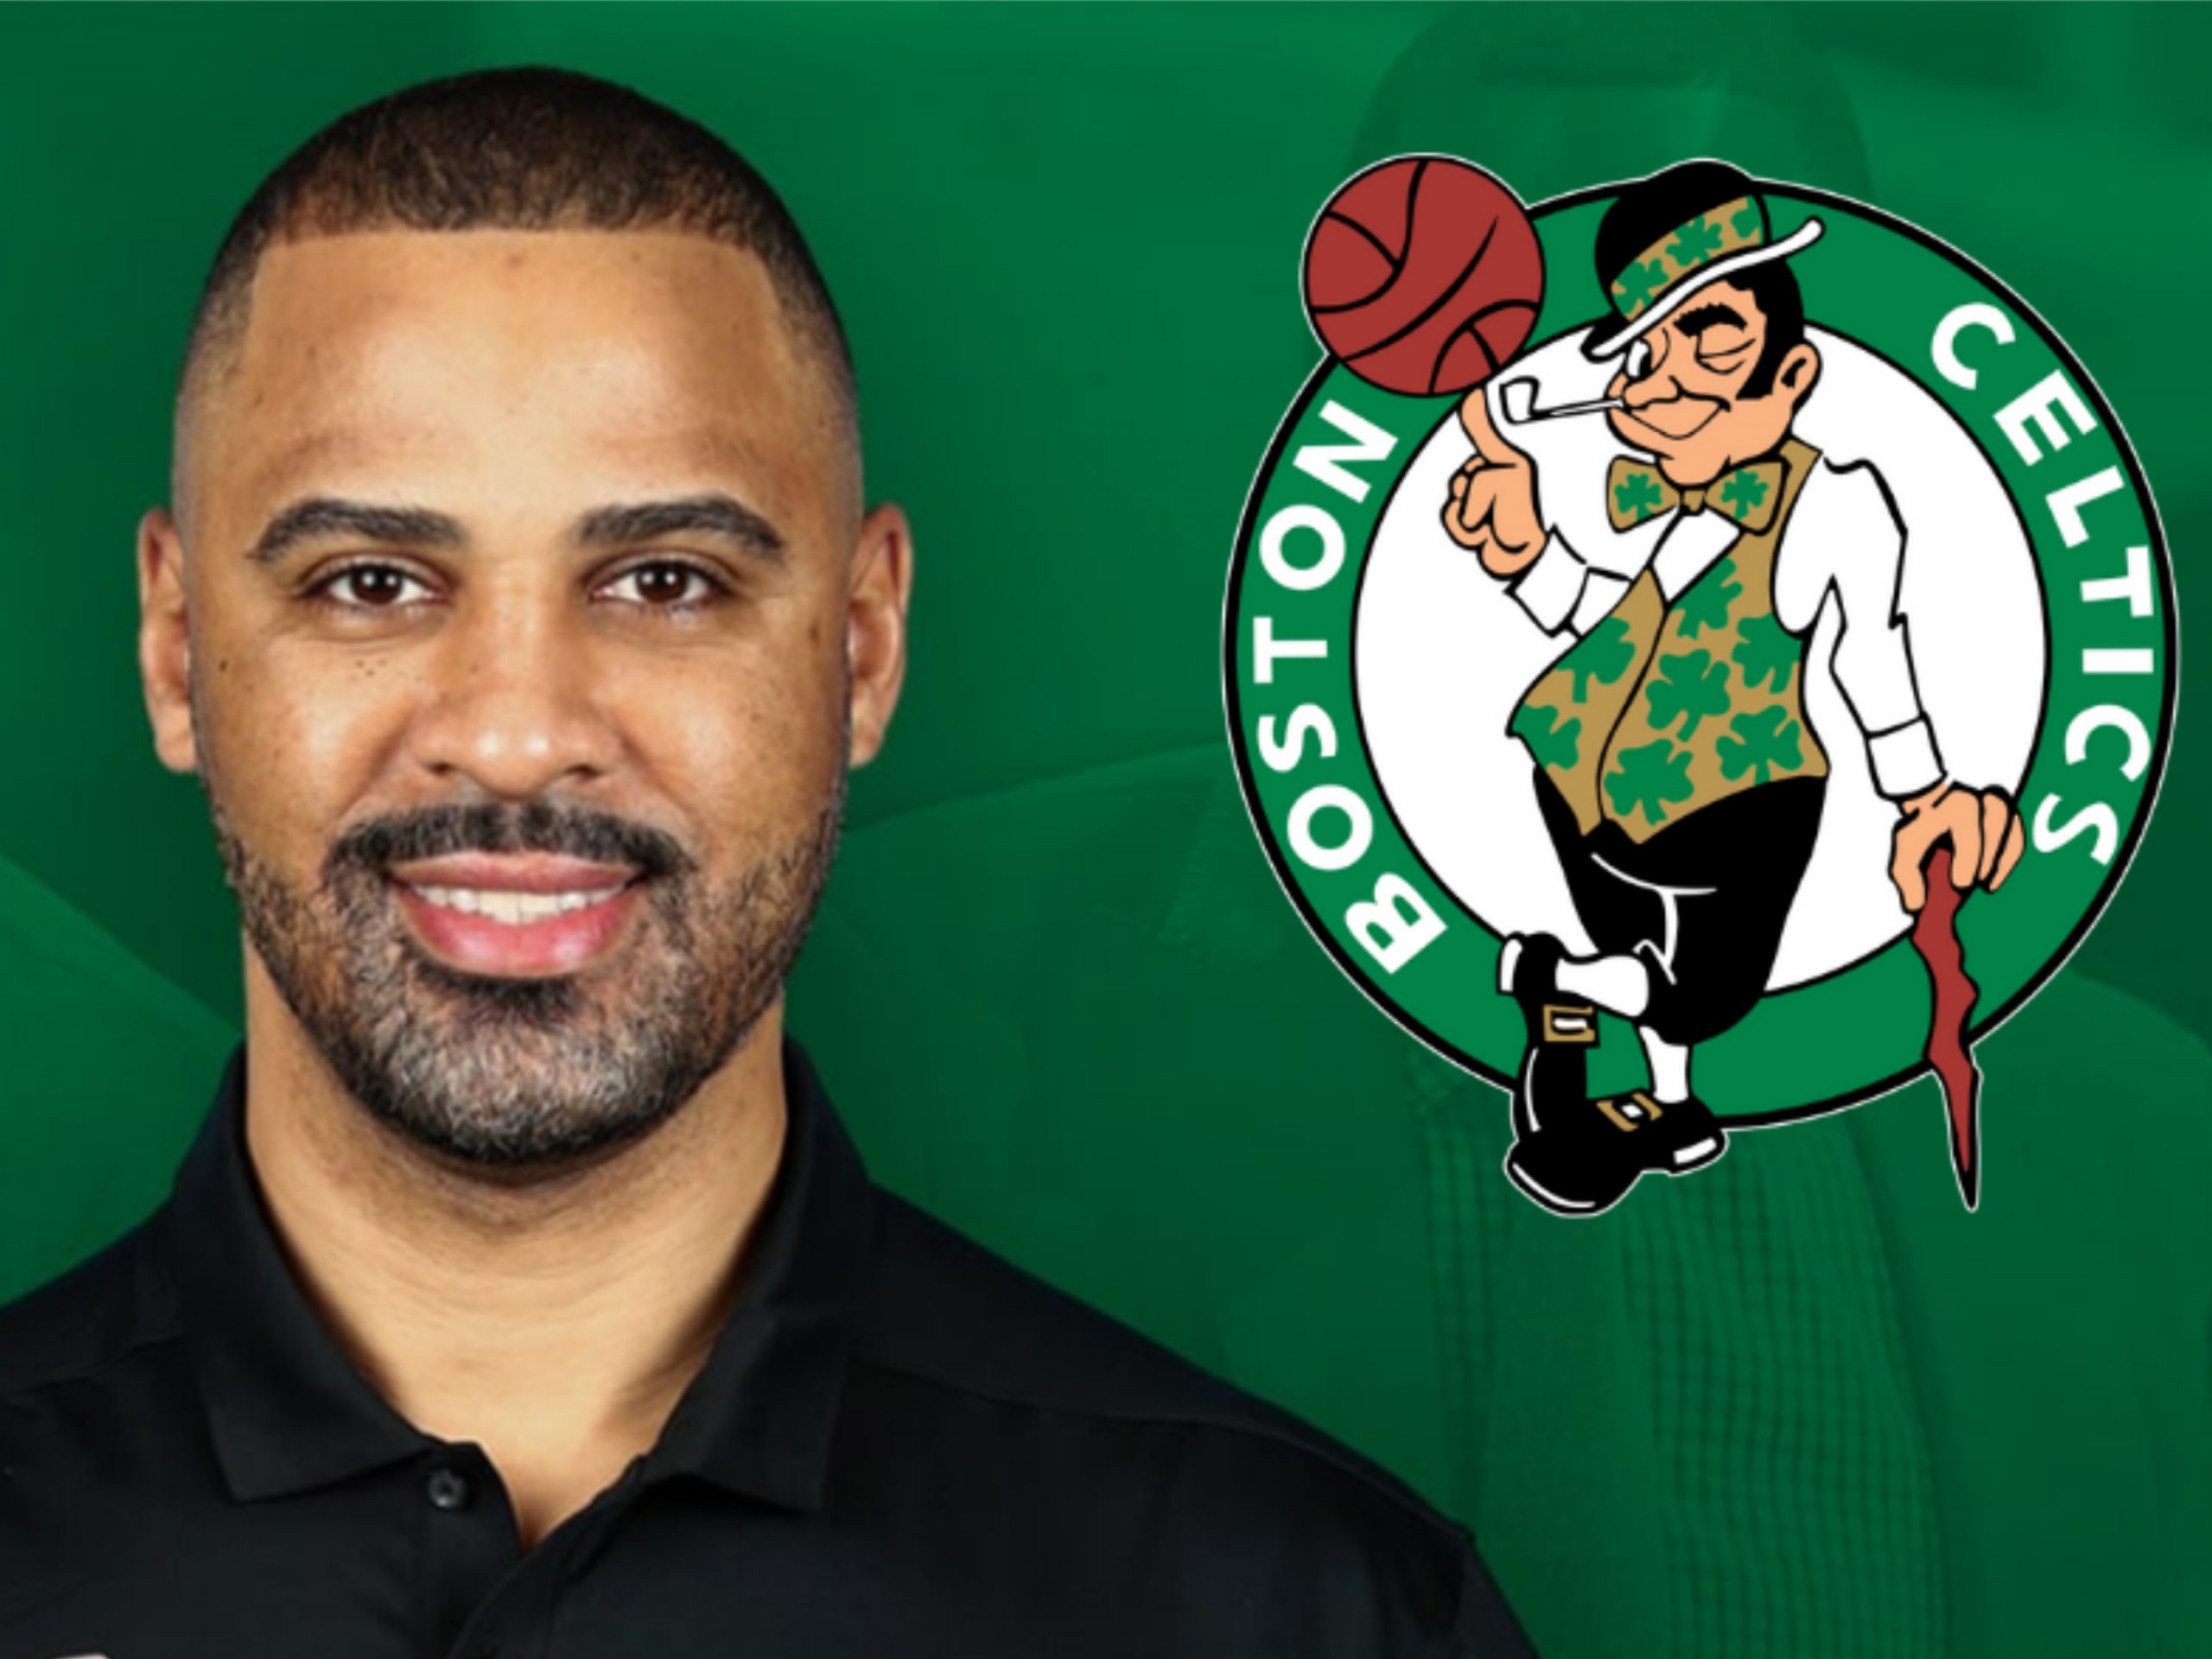 Celtics Head Coach Ime Udoka Reportedly Won’t Resign After Alleged Relationship with Staff Member